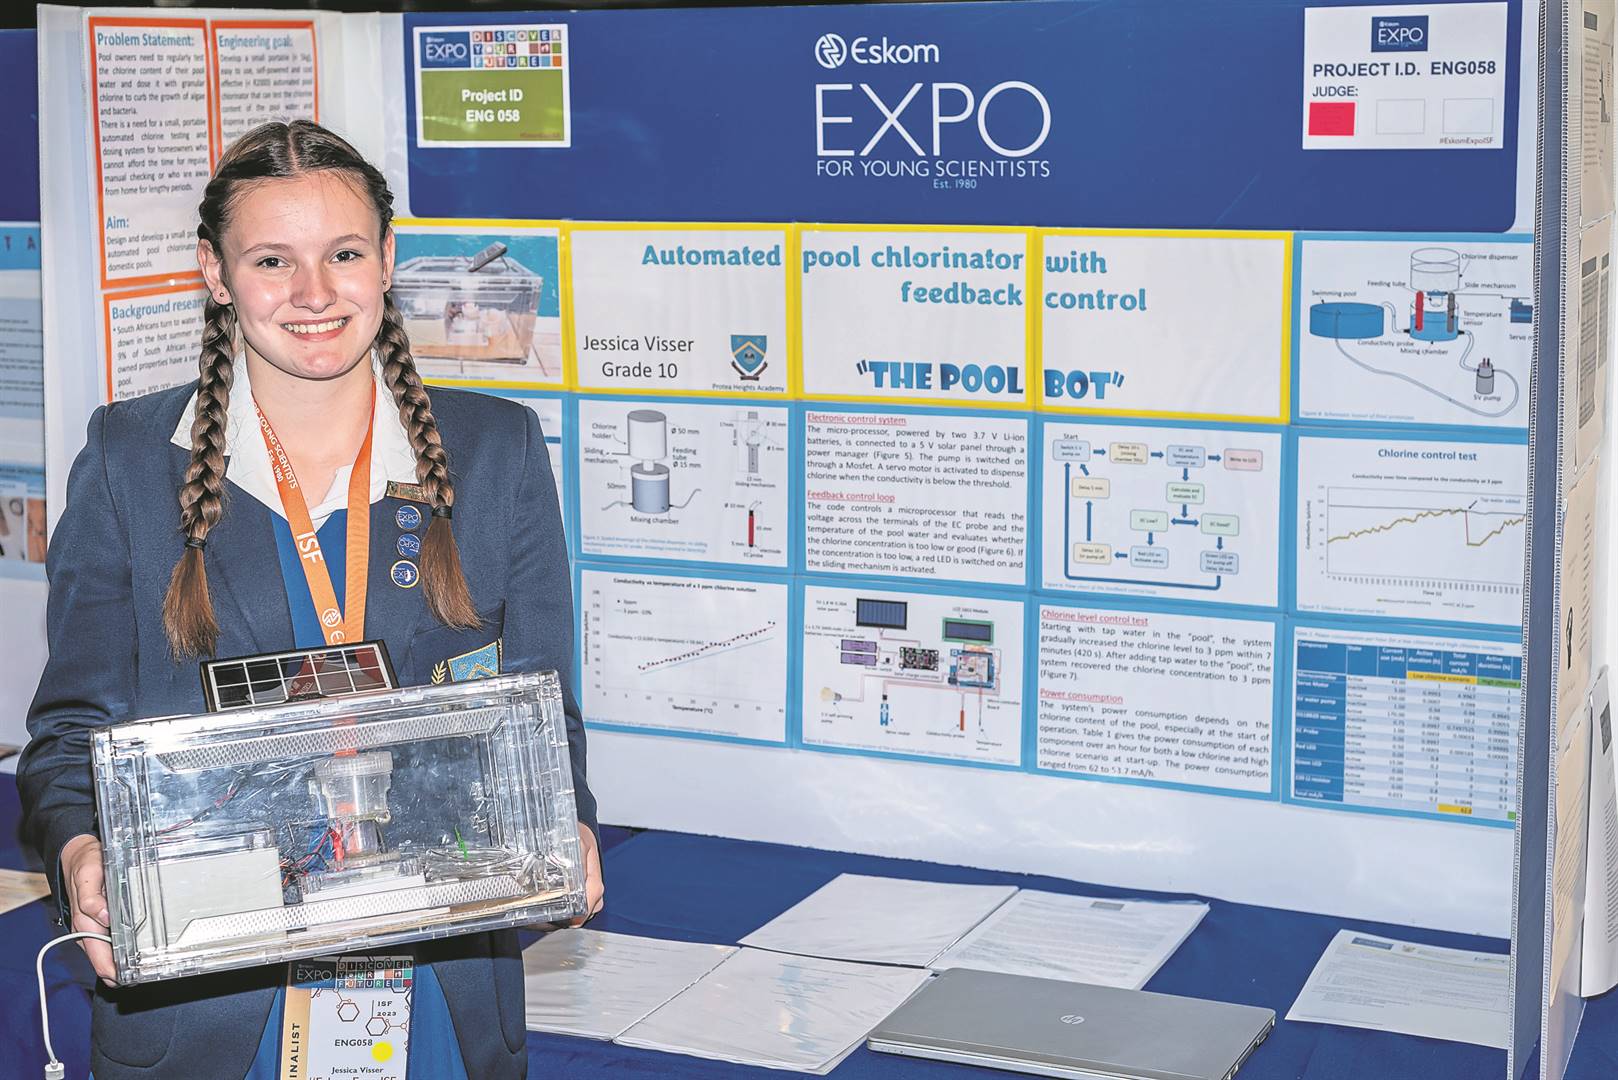 Young scientist from Brackenfell showcase skills at Eskom Expo ...